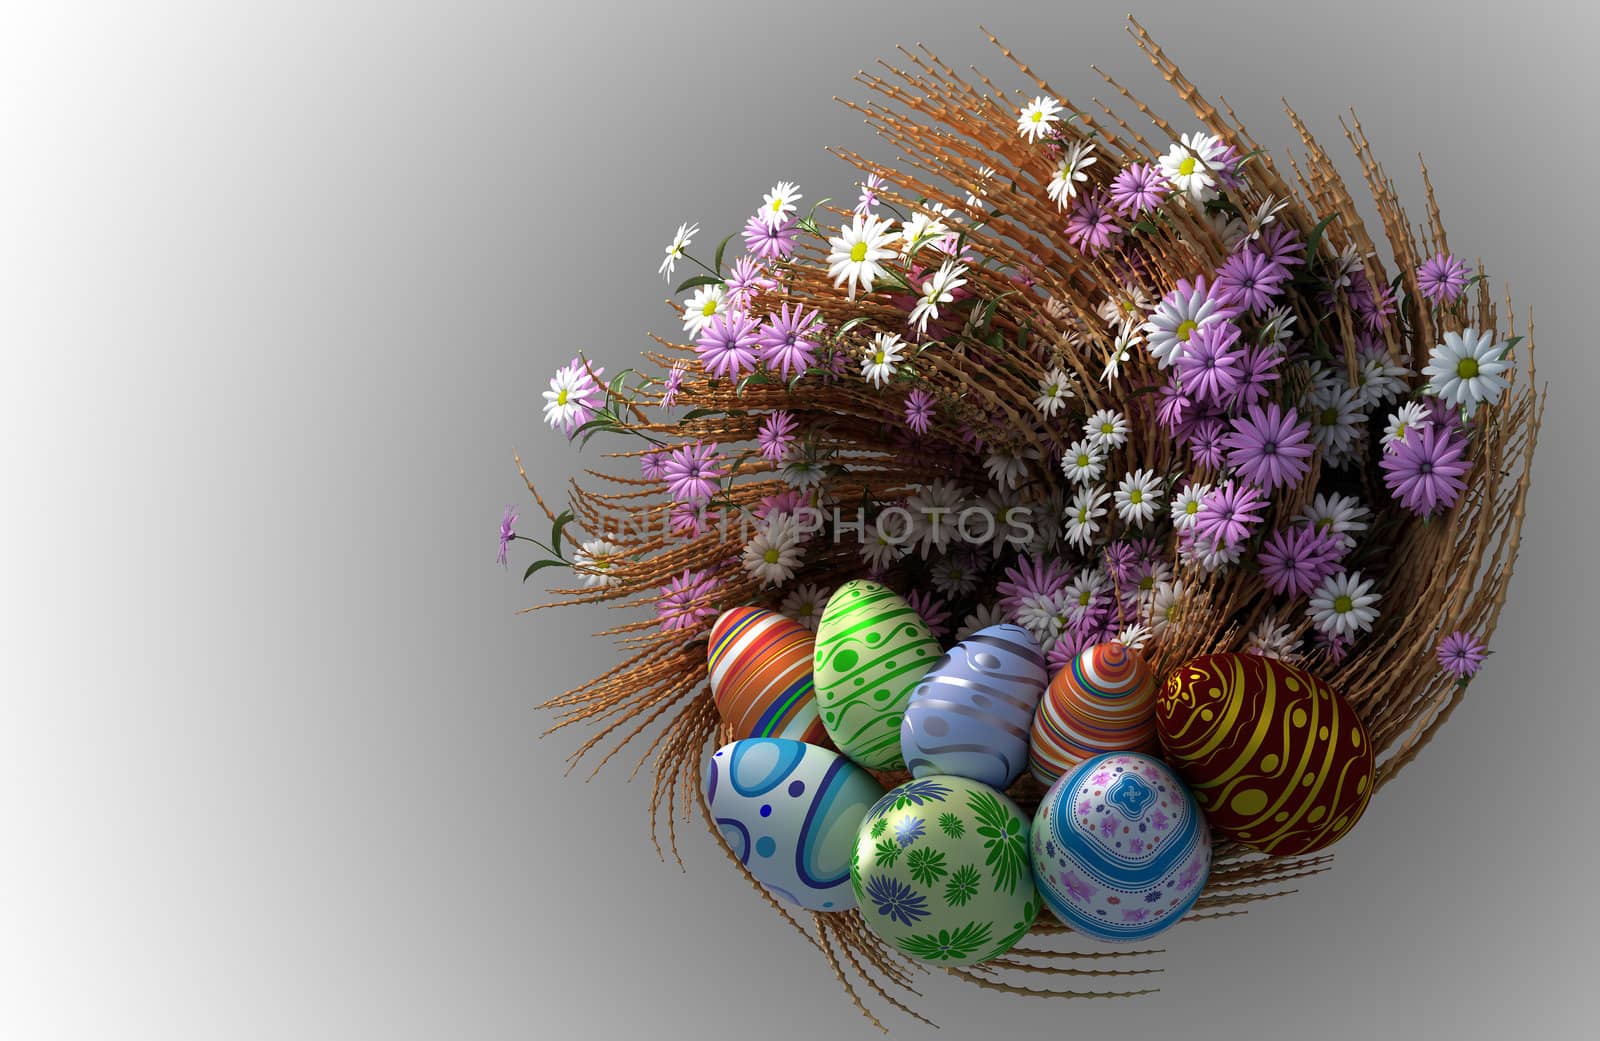 decorated Easter eggs with plants and flowers by denisgo